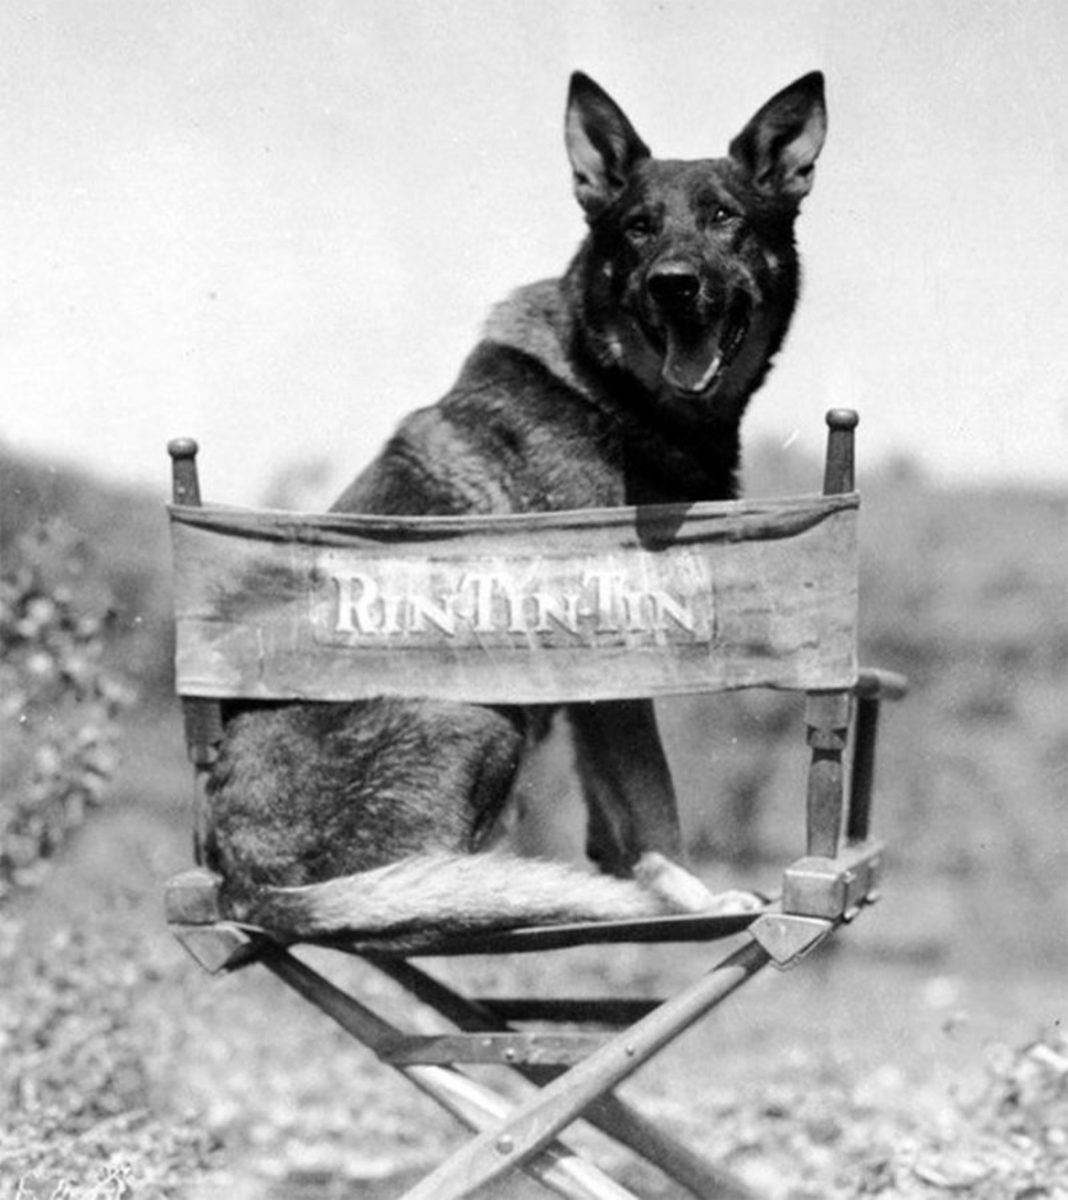 The Story of Canine Movie Legend Rin Tin Tin